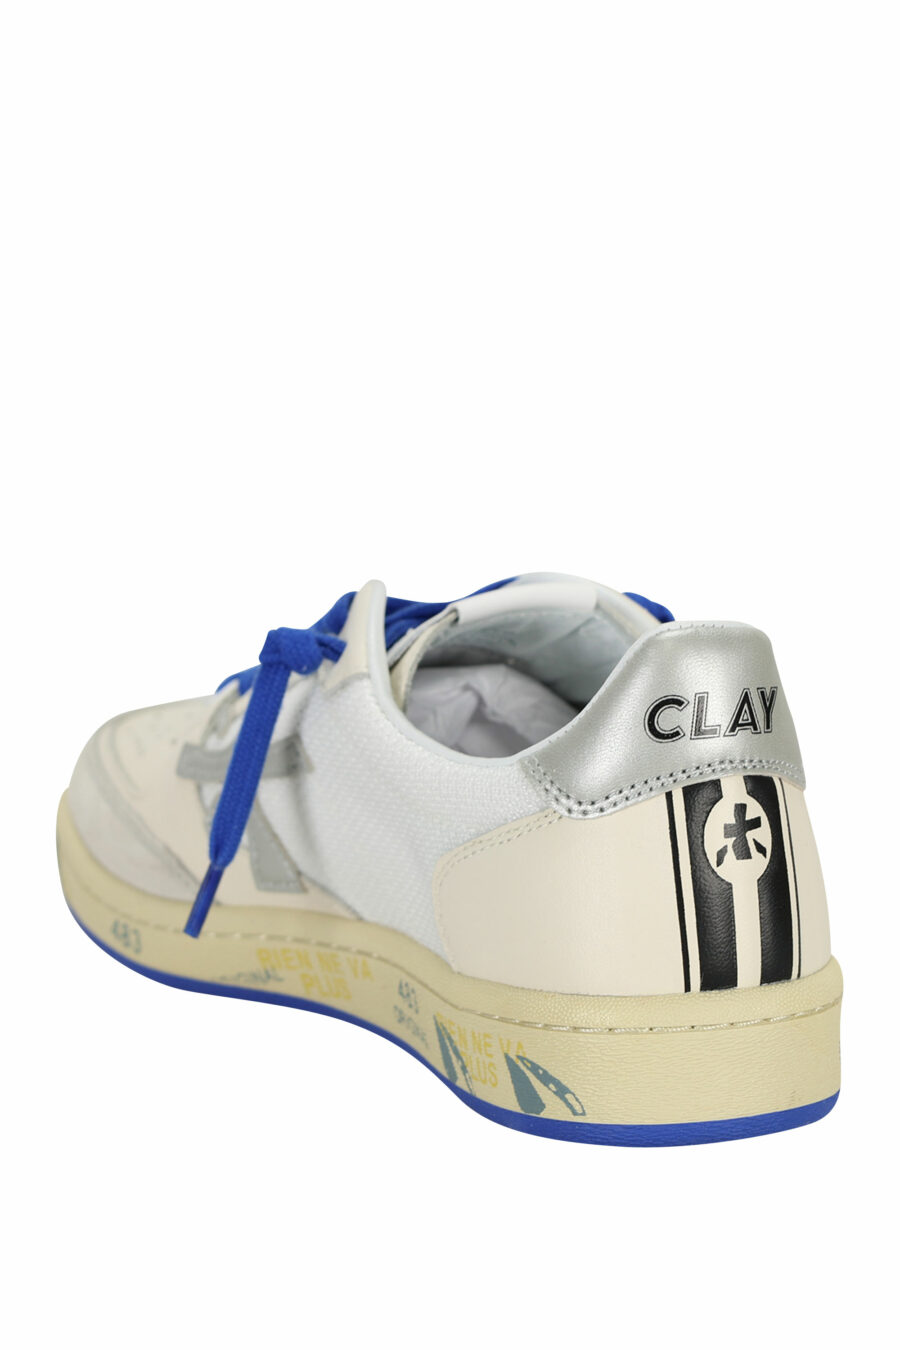 Trainers white with blue BSKTCLAY 6810 - 8053680315294 3